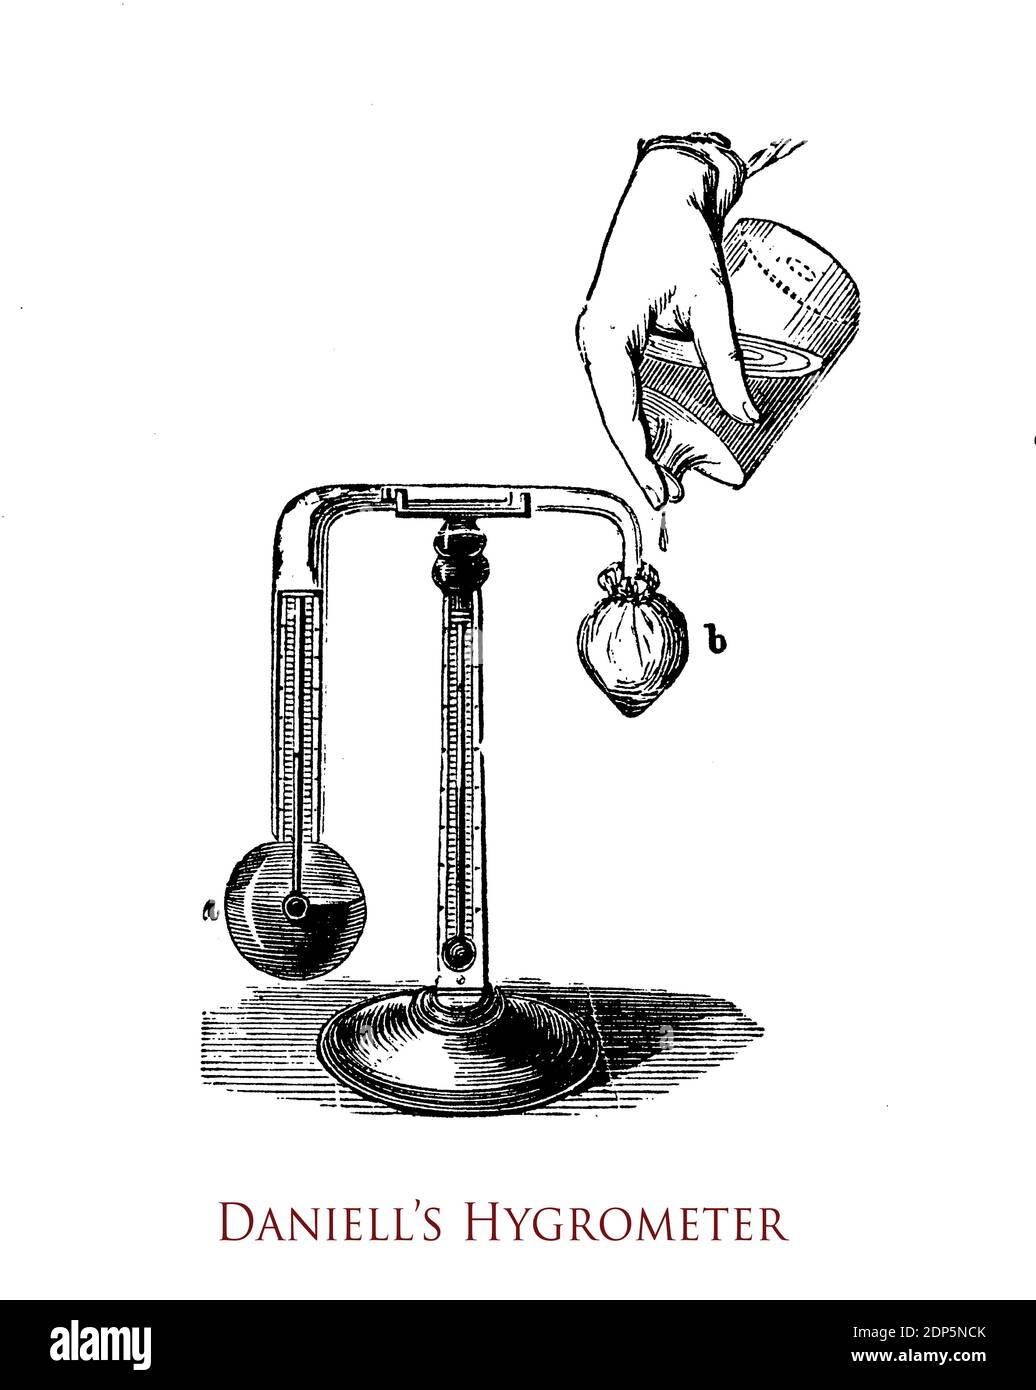 Daniell's hygrometer measures the air humidity, it consists of a thermometer and two glass balls, one filled with ether vapors condensing inside. Stock Photo